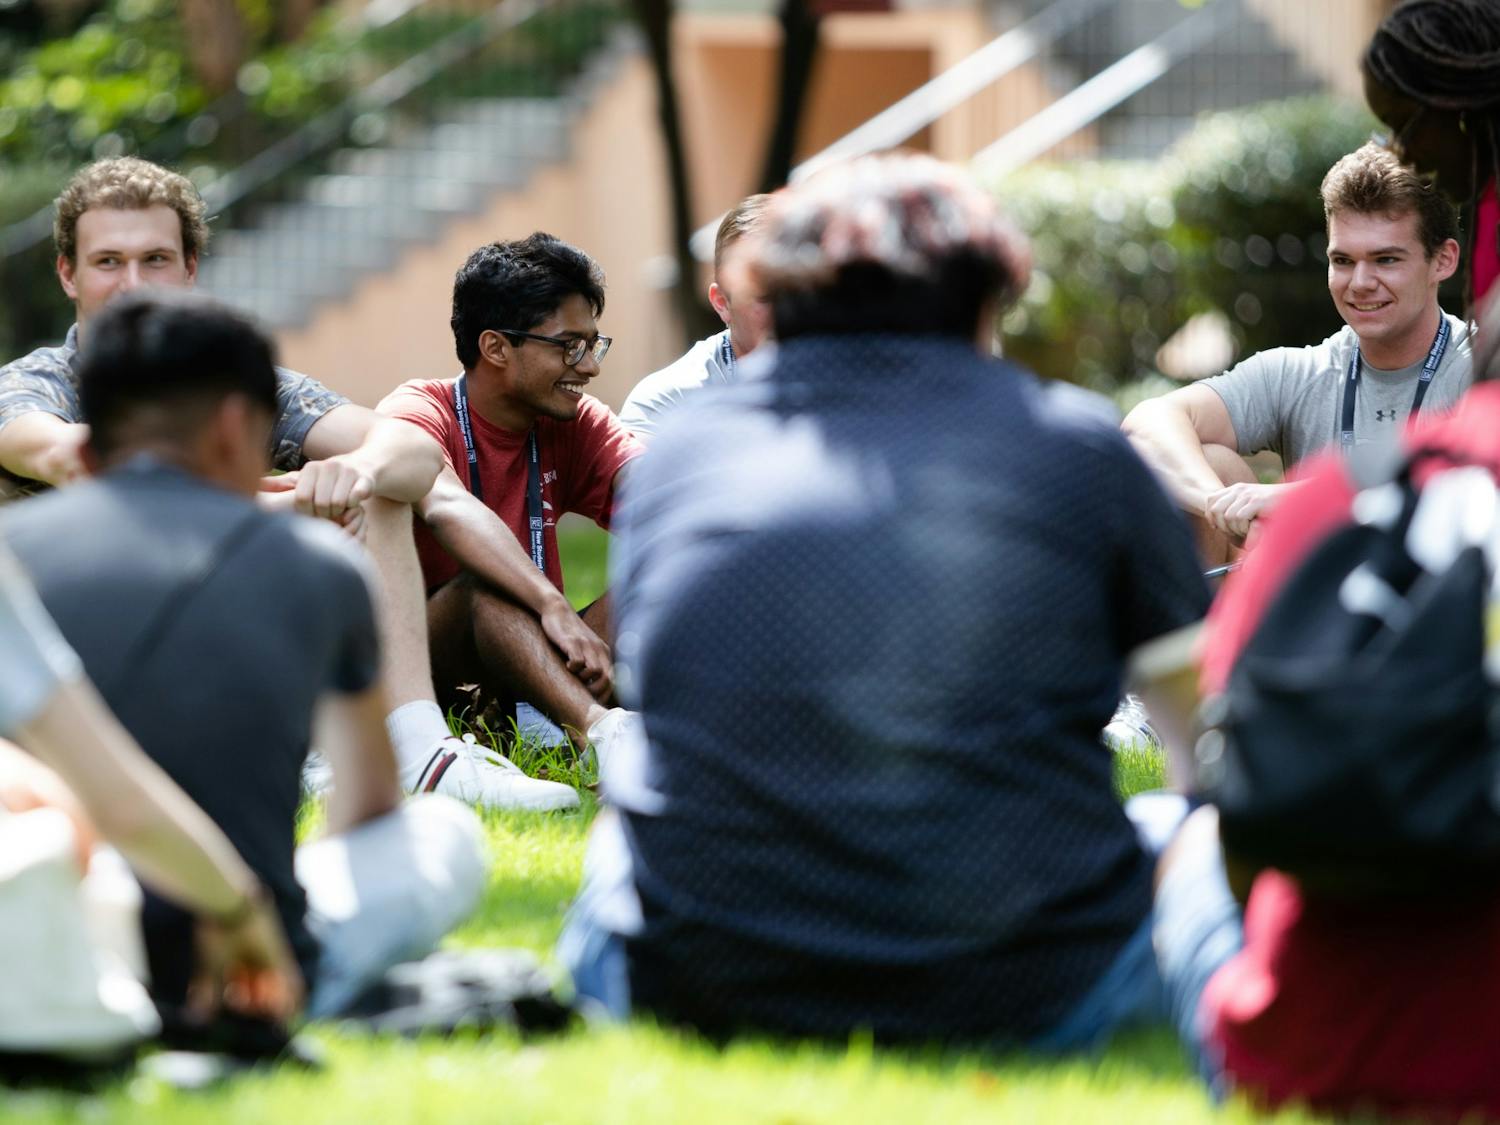 An incoming student laughs with people in his orientation group during a session on July 20, 2022. Students listened to presentations, toured campus and played games during orientation sessions held throughout the summer.